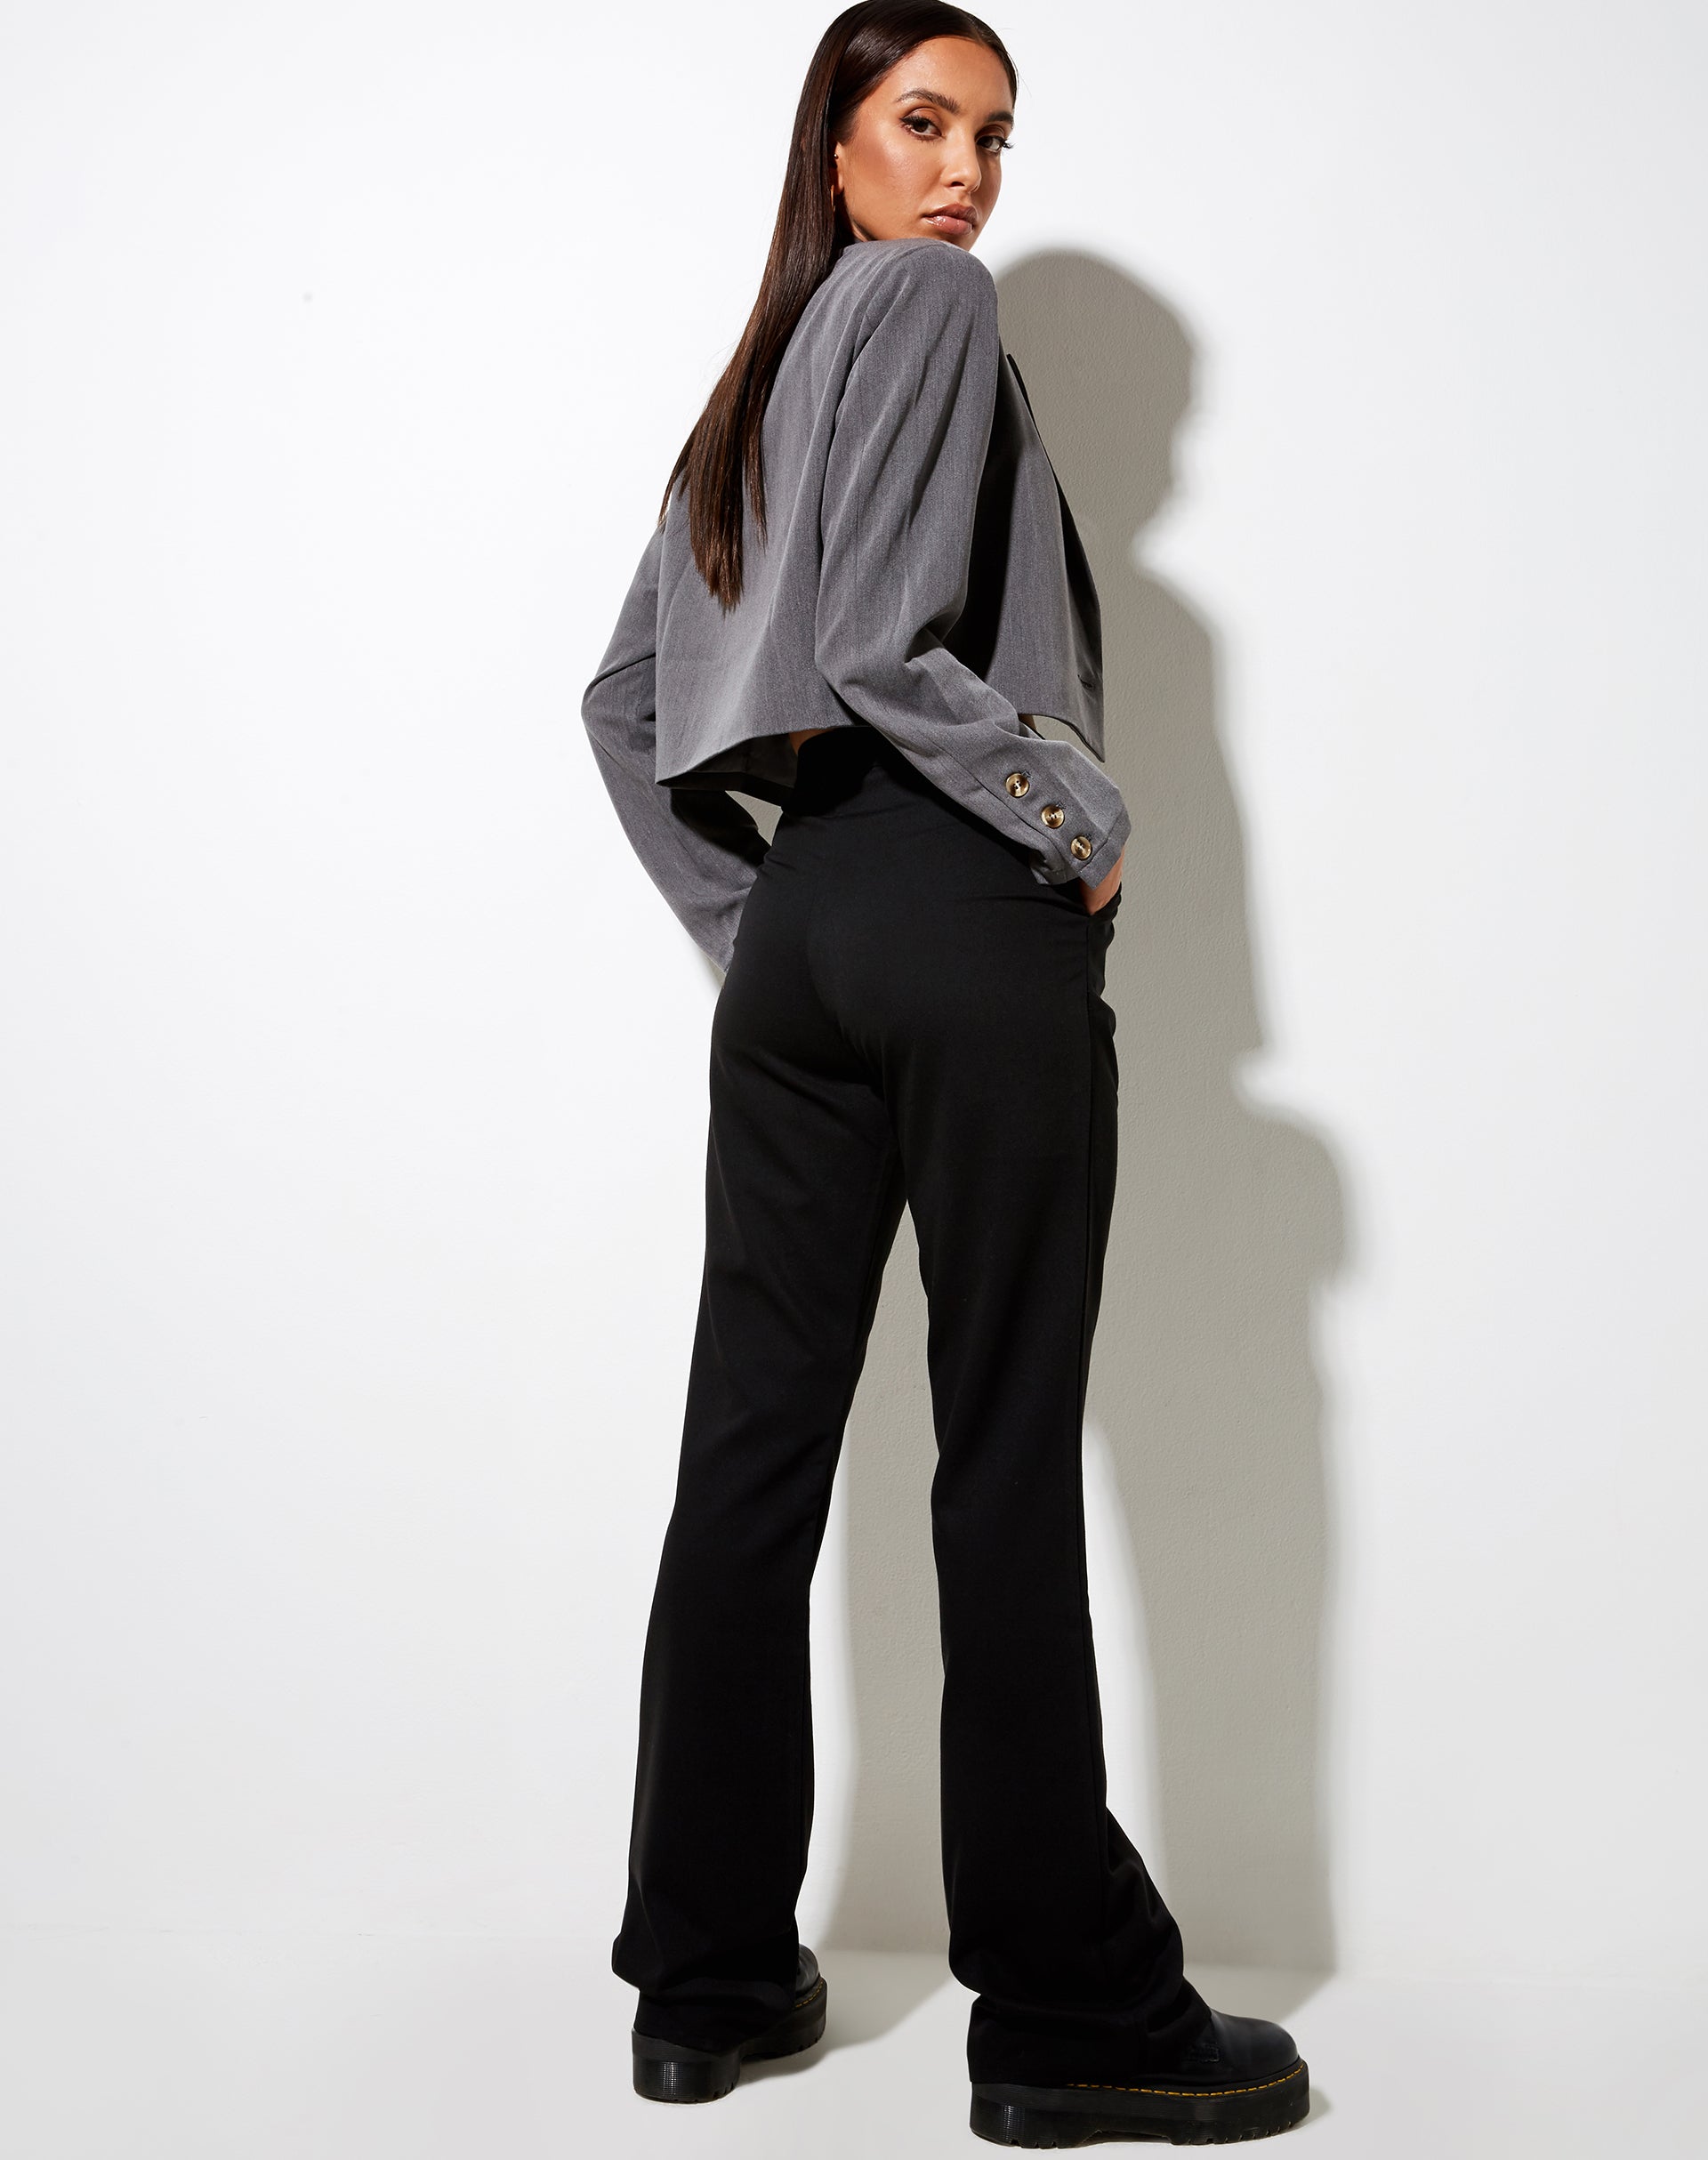 Image of Zoven Flare Trouser in Tailoring Black